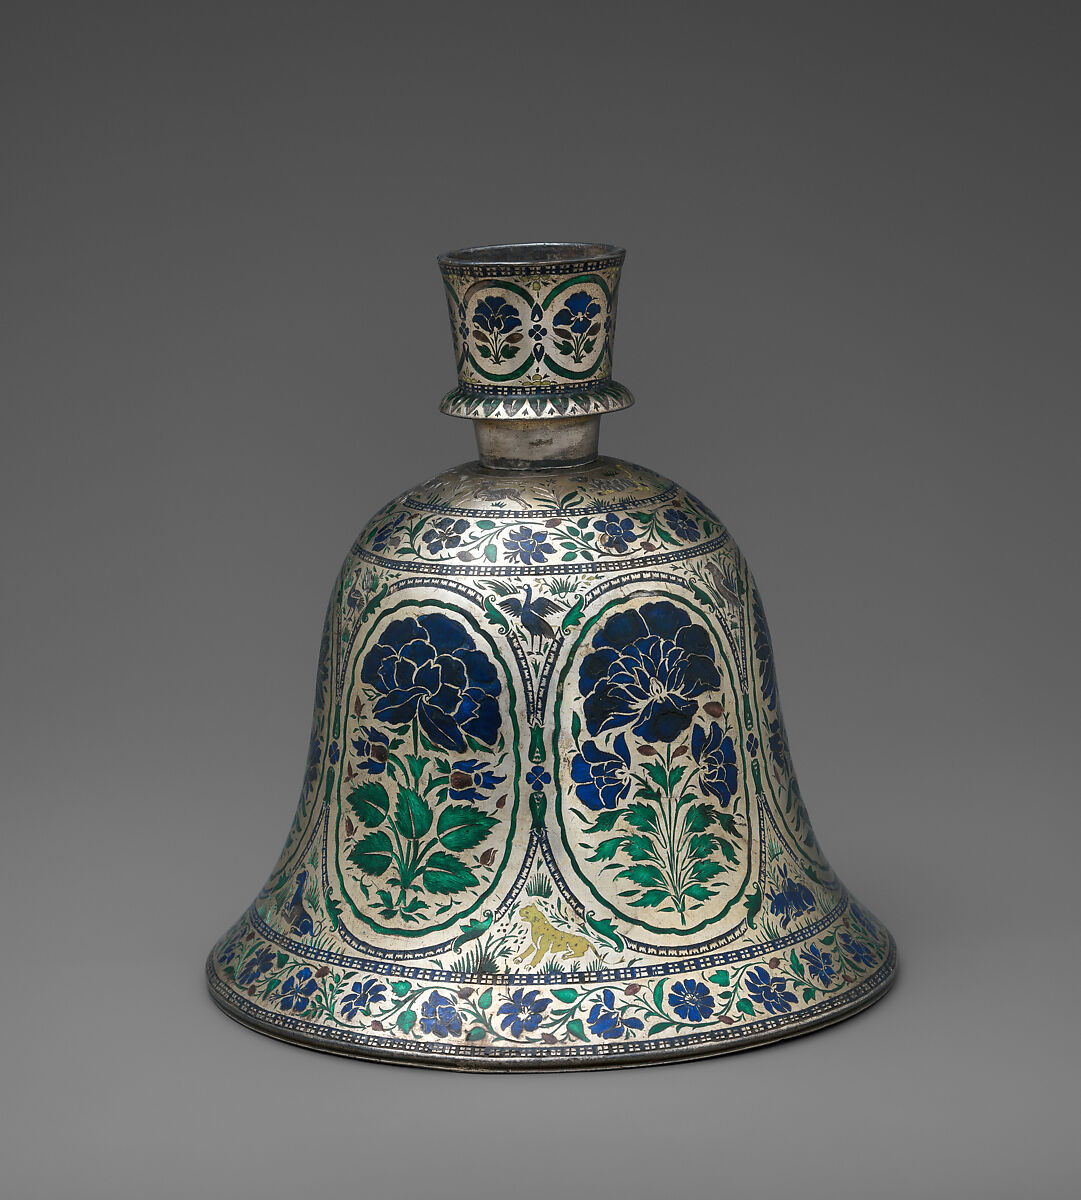 Huqqa Base, Silver with enamel, India (probably Lucknow) 